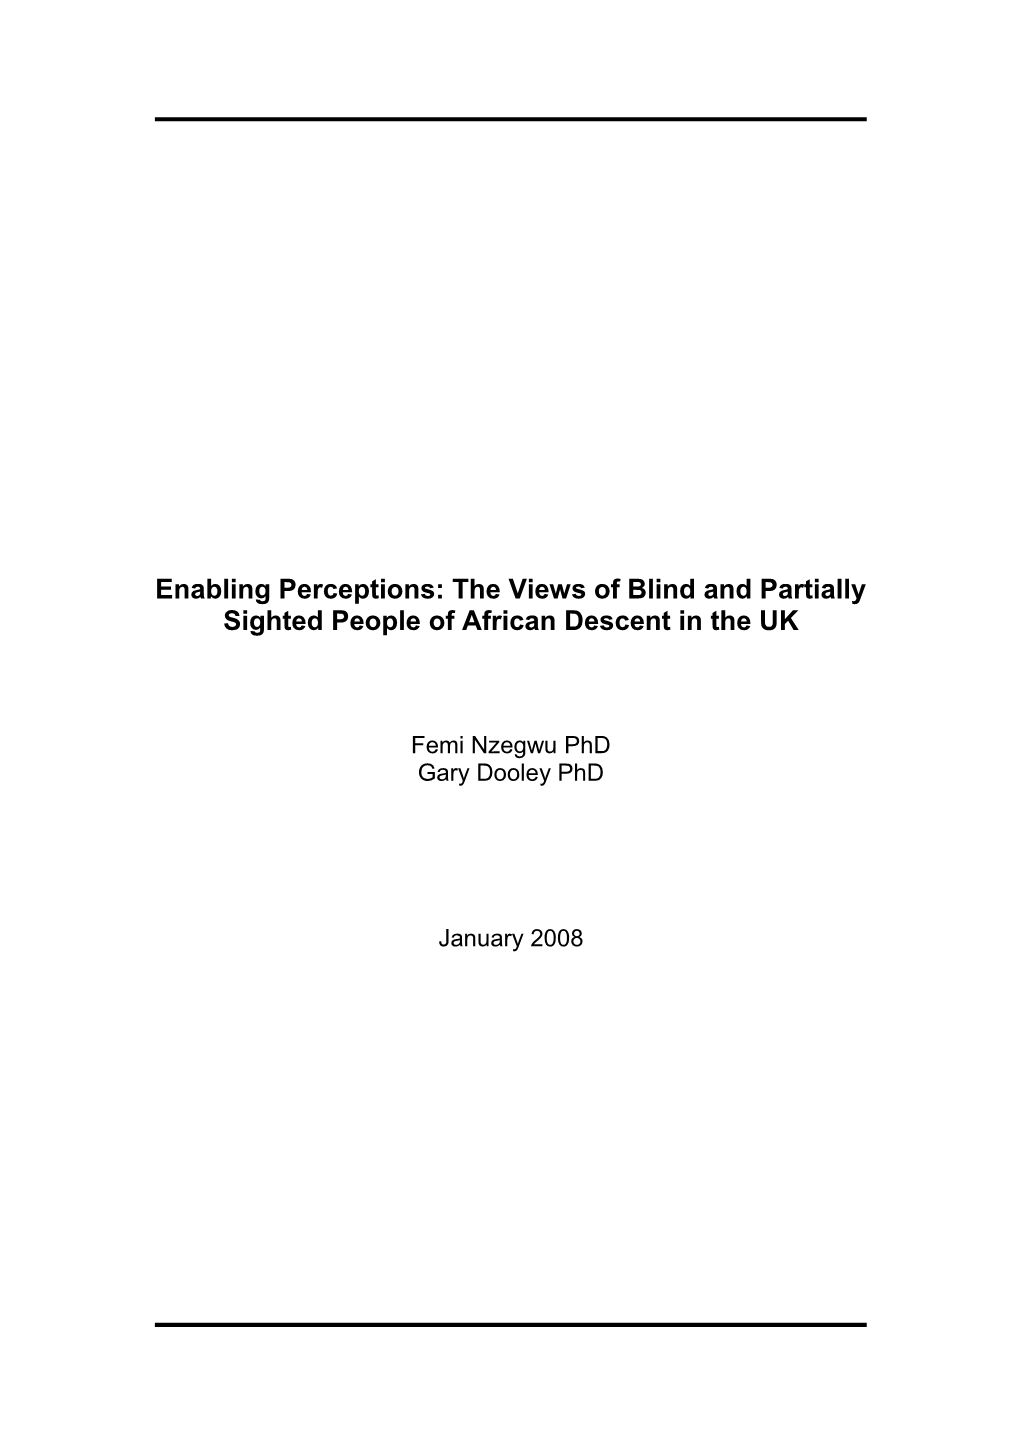 Enabling Perceptions: the Views of Blind and Partially Sighted People of African Descent